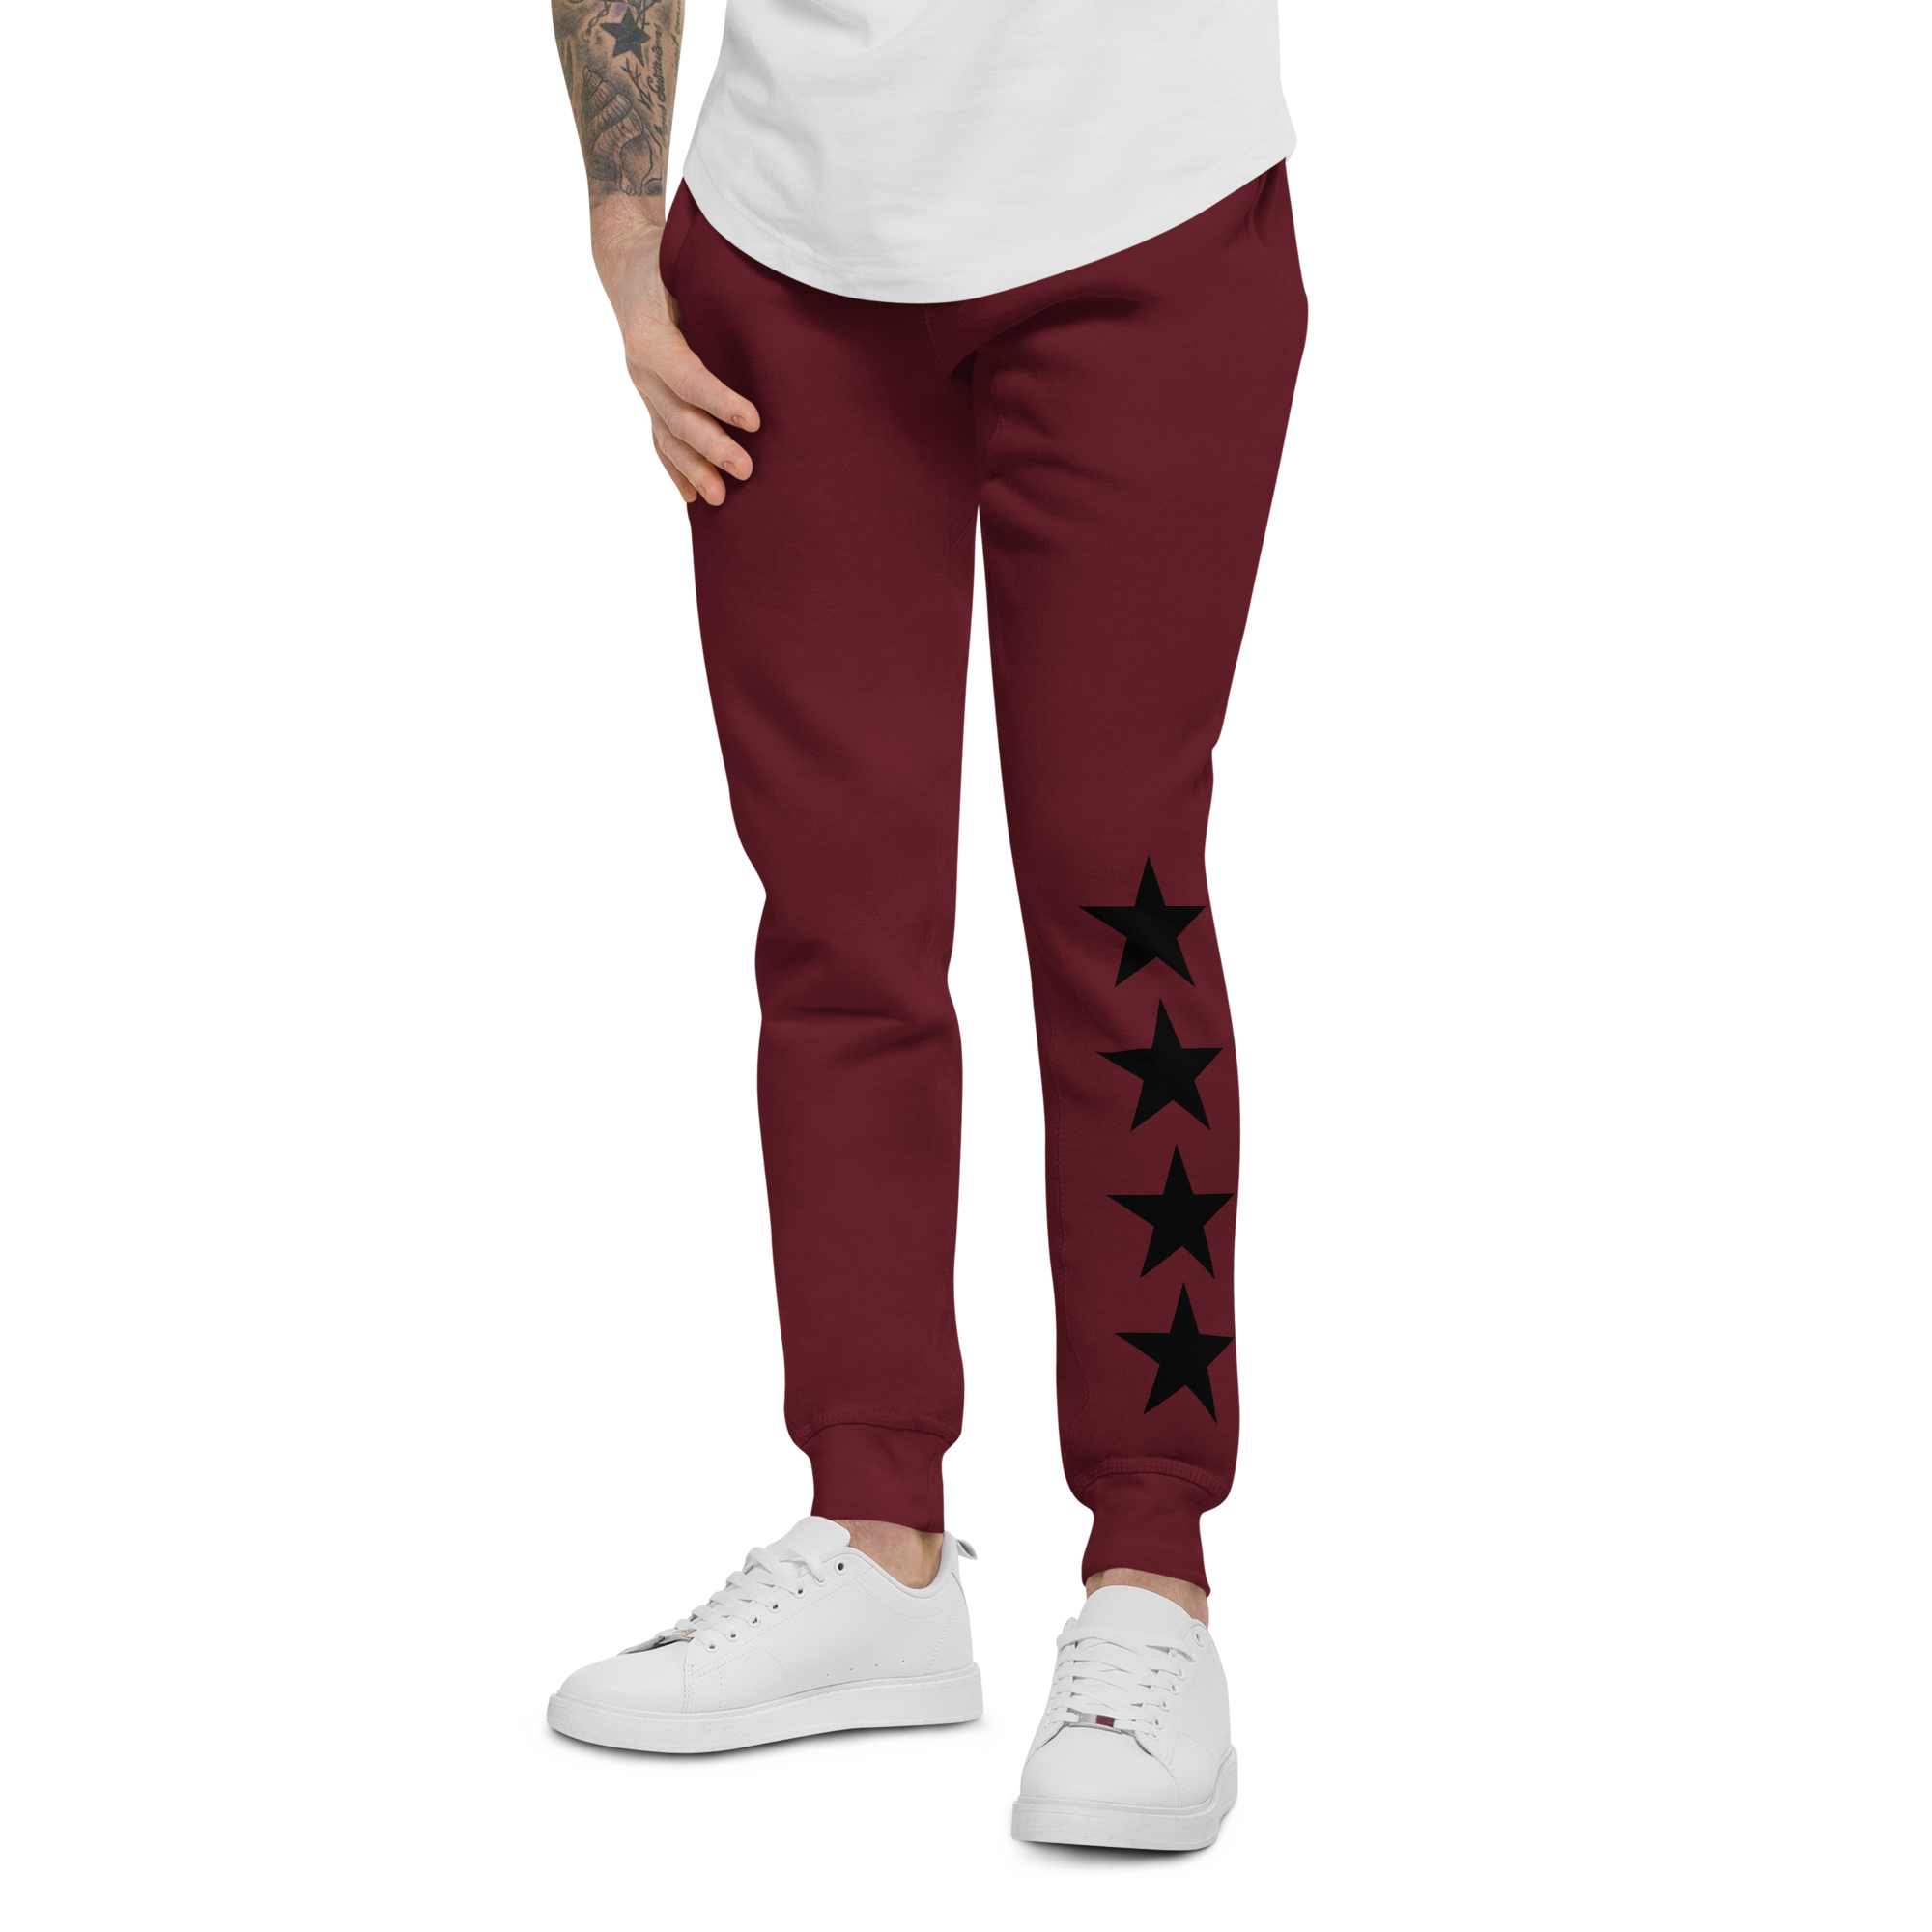 Riches Couture Mens Sweatpants red burgandy